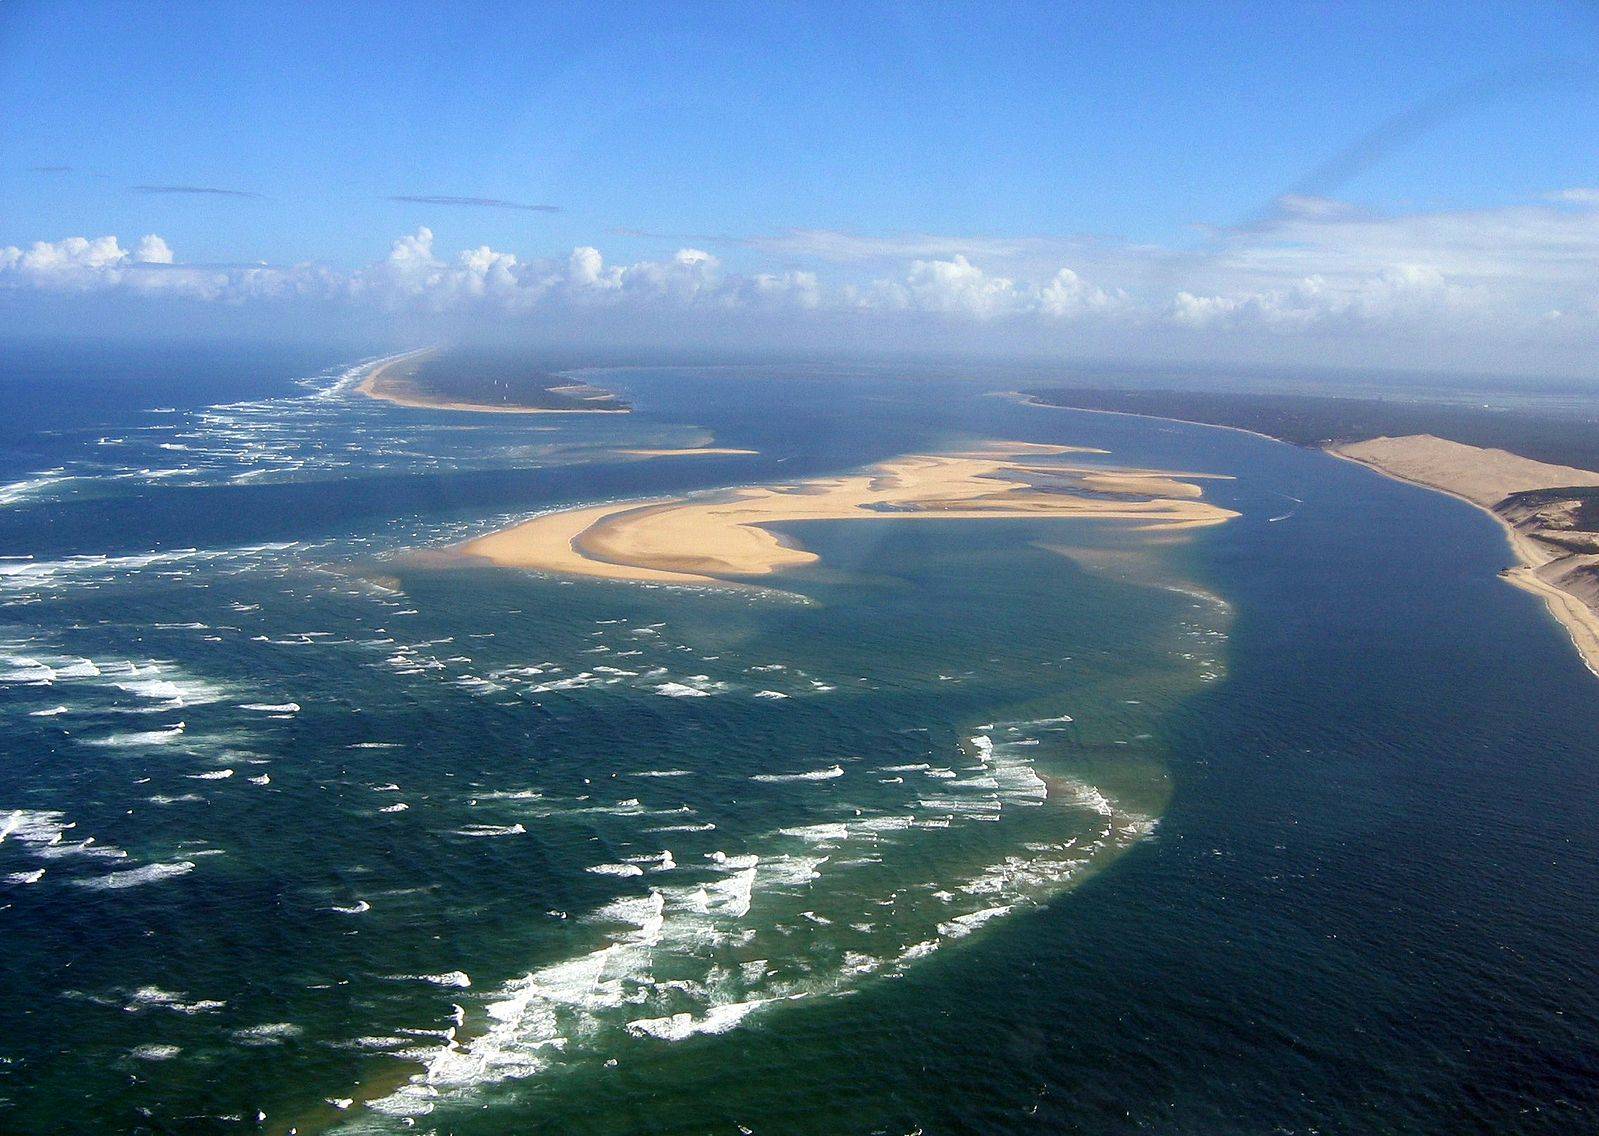 Come and discover the beautiful Bird Island in the Arcachon Bay